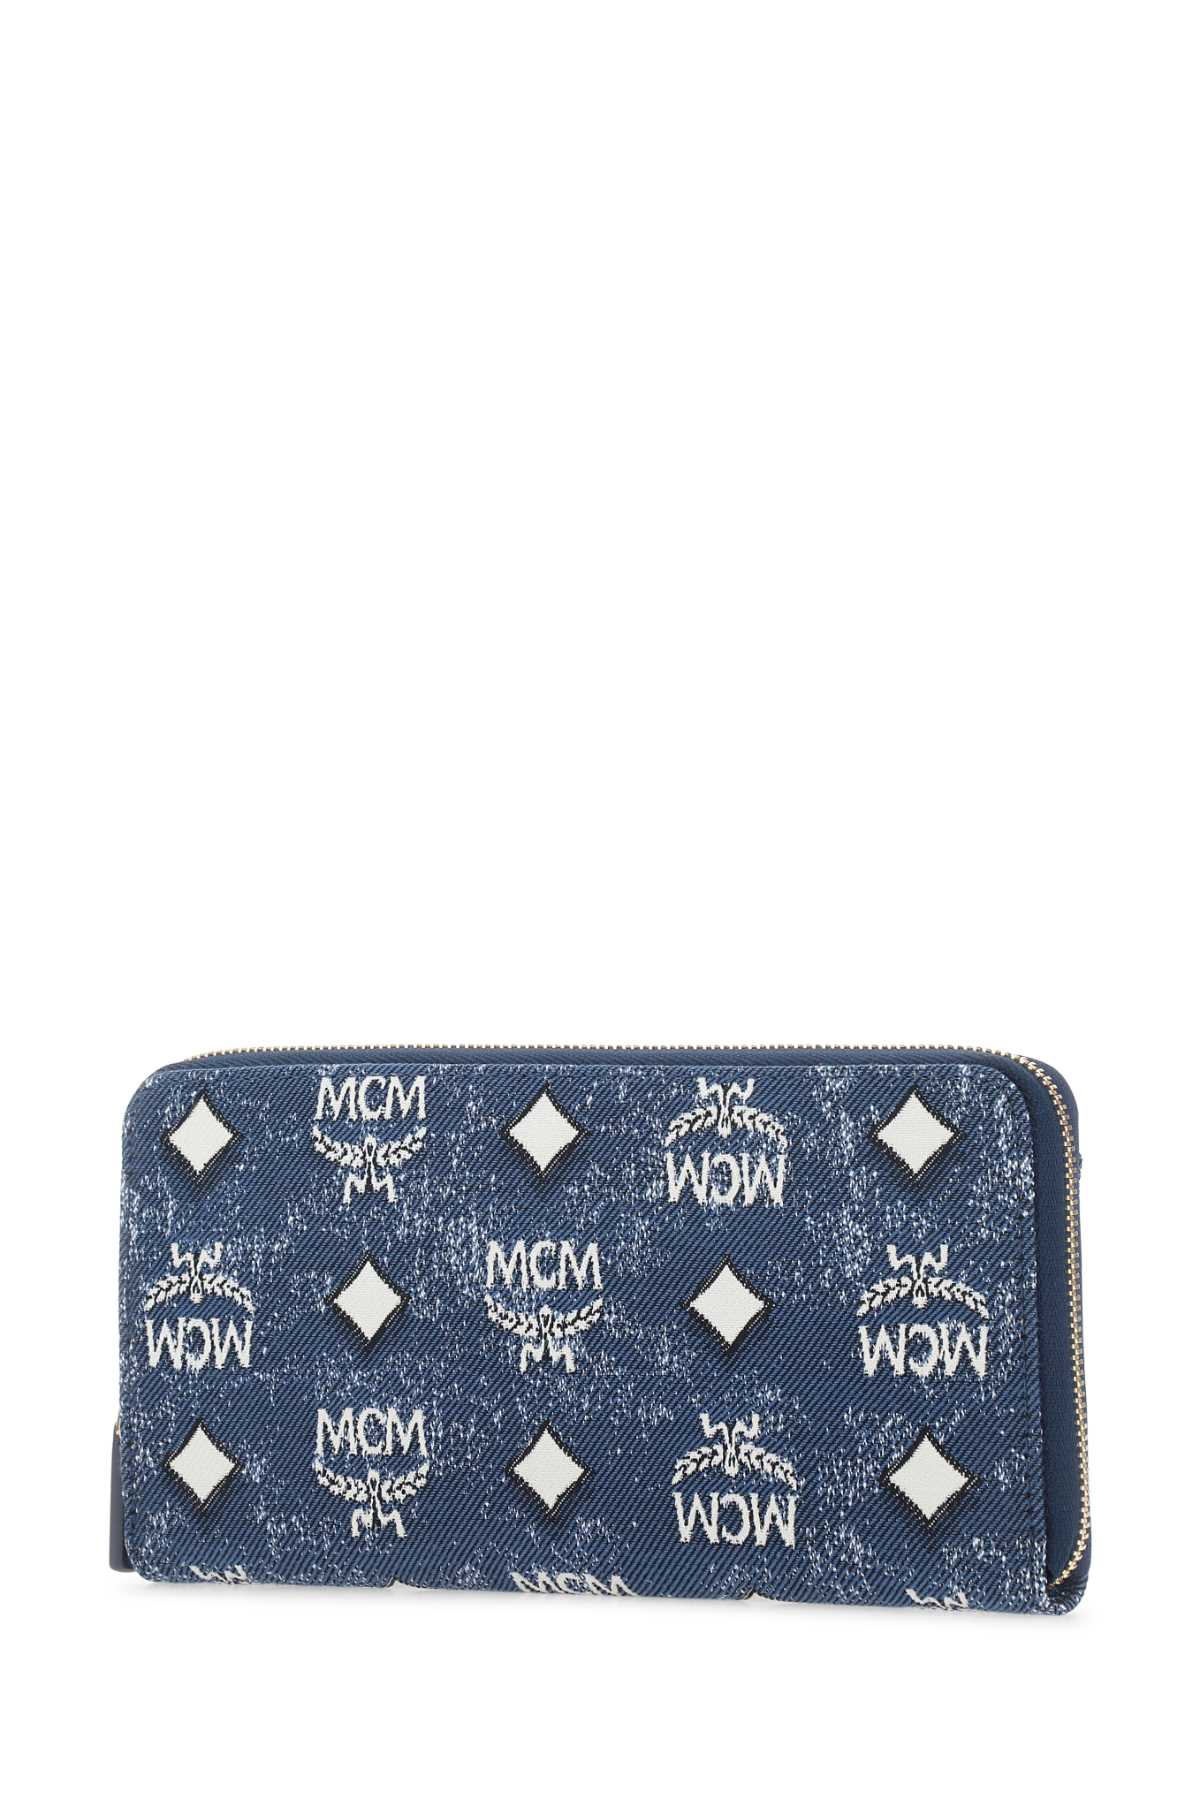 Shop Mcm Embroidered Canvas Wallet In Le